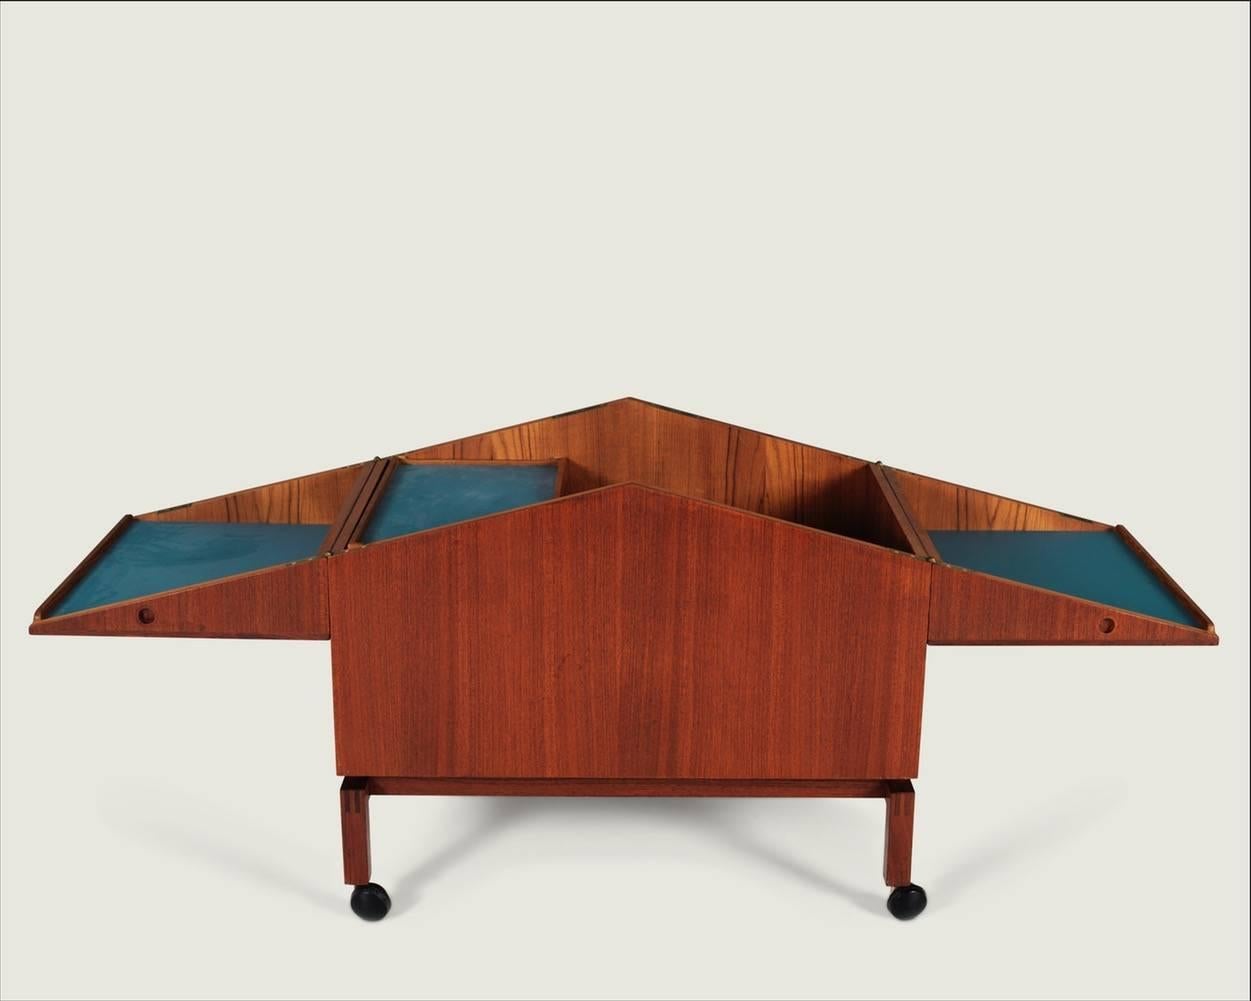 Leif Alring (1936-1987)
Unfolding bar cabinet / model 284 
Teak bar on wheels with blue formica inlay.
Cabinet designed with lockable top, removable tray and compartments for glasses and bottles. Designed in 1964, produced by C. F. Christensen,